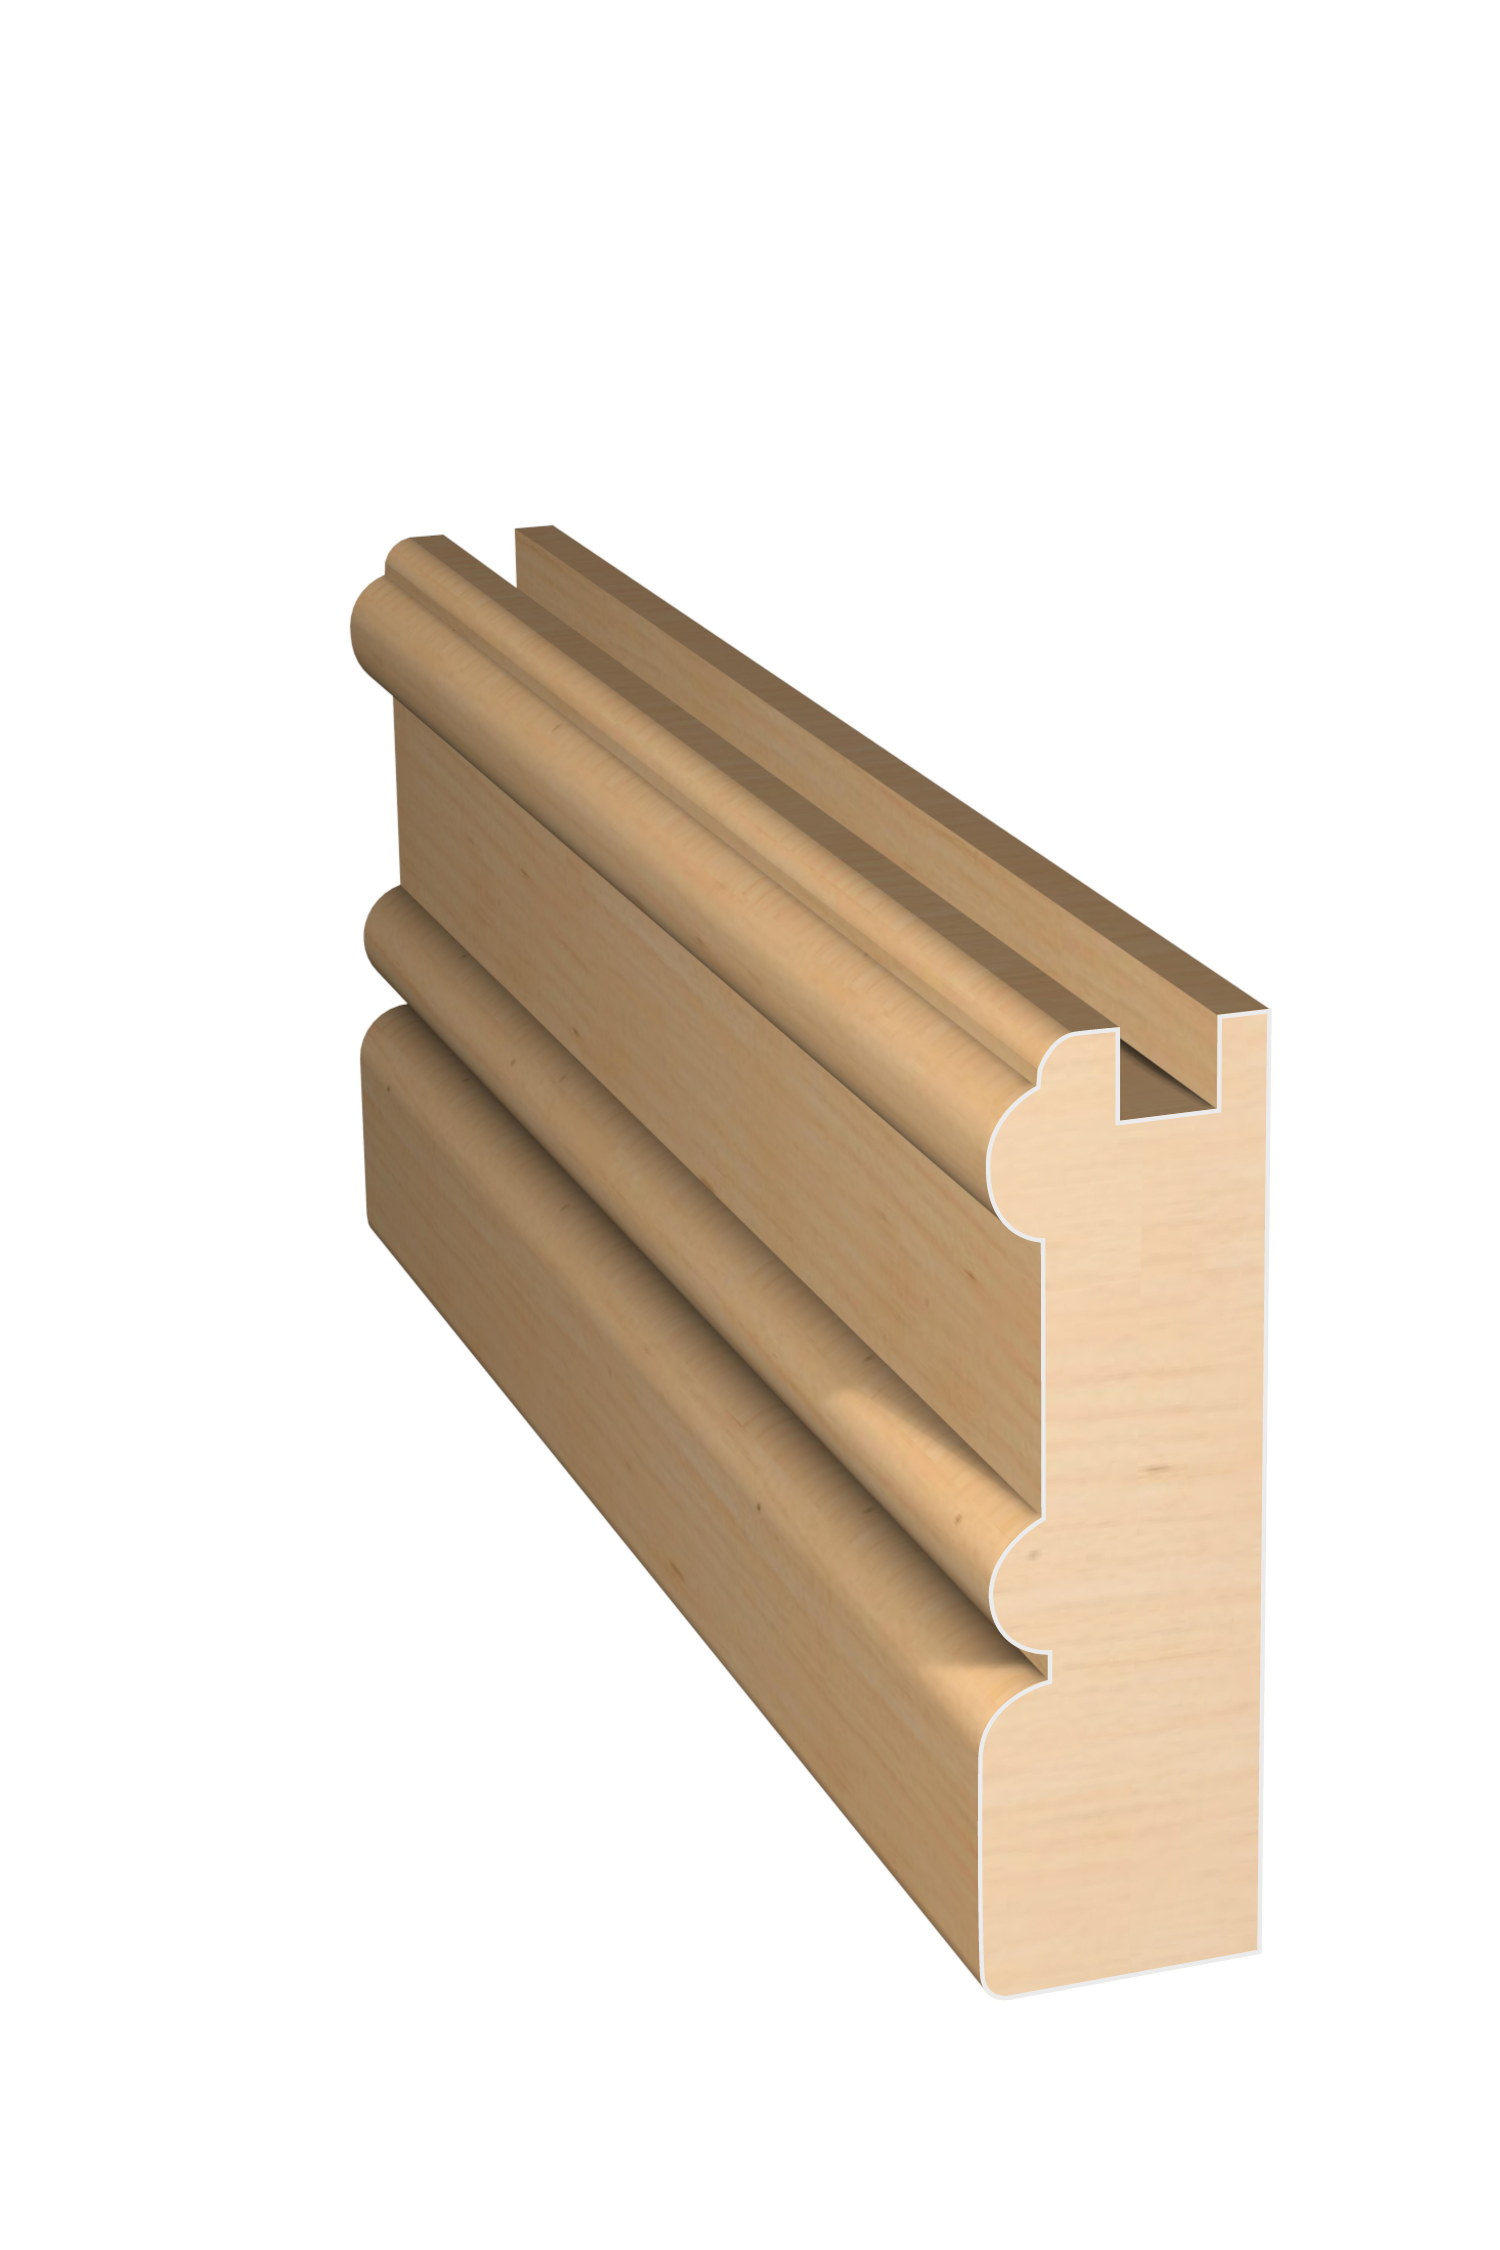 Three dimensional rendering of custom cabinet rail wood molding CABPL2122 made by Public Lumber Company in Detroit.